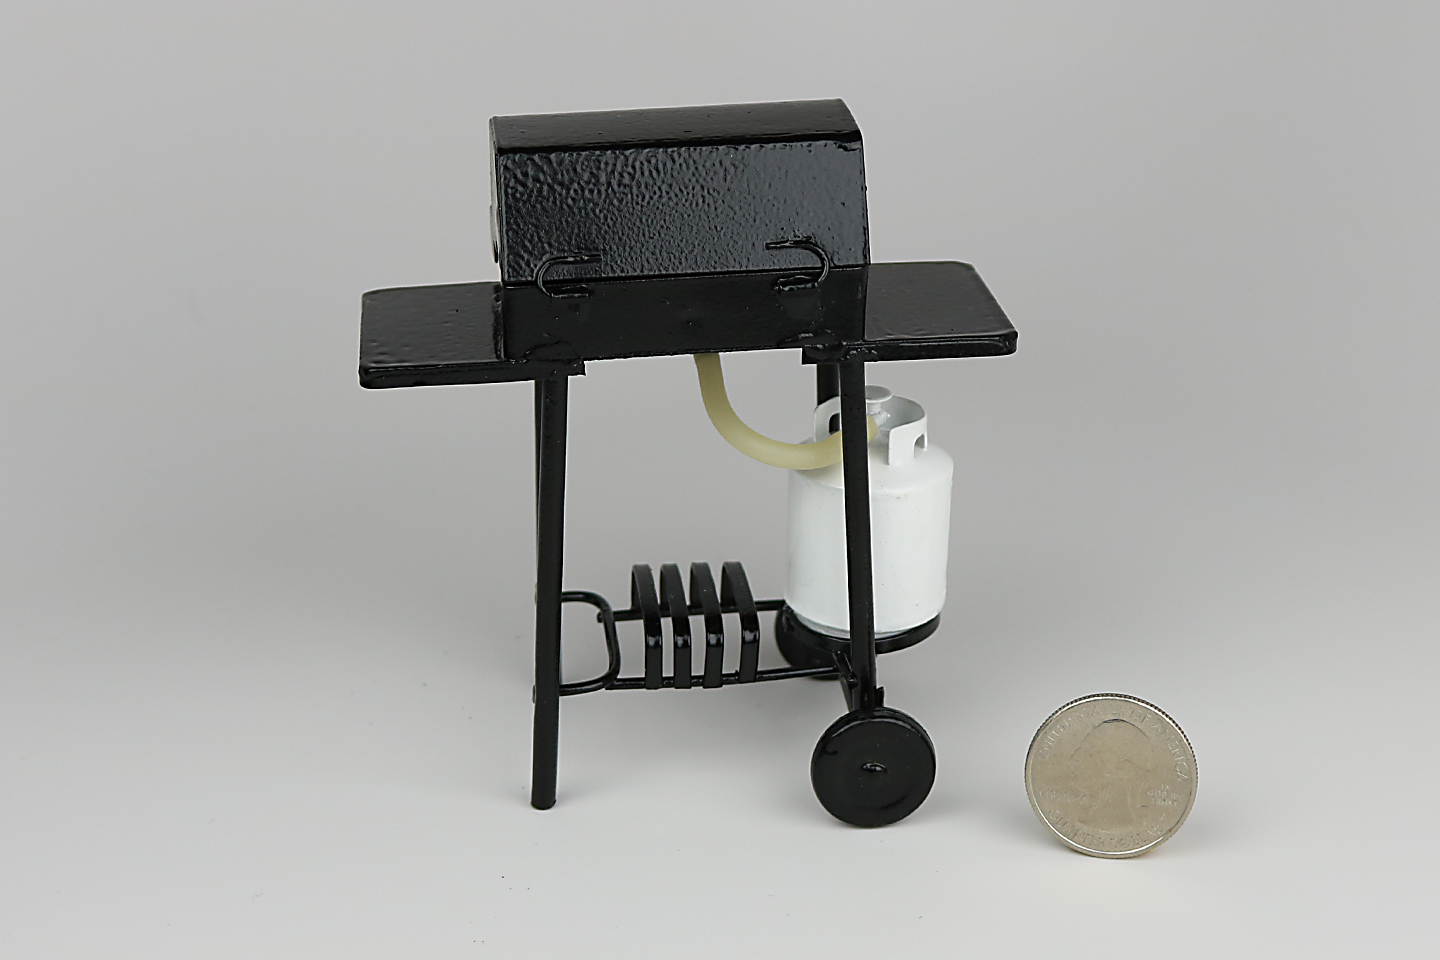 Barbecue Grill with Propane